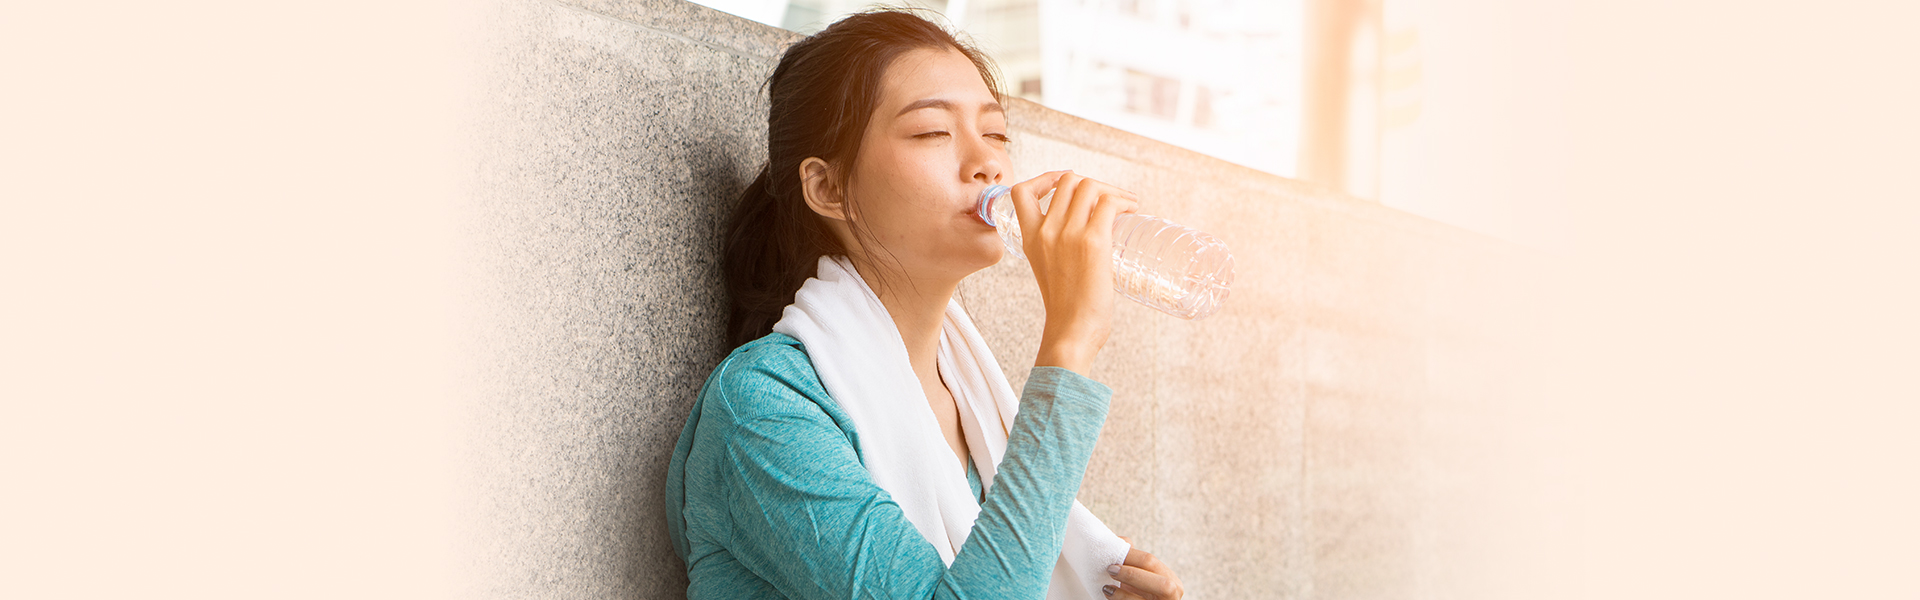 How Long Does It Take to Rehydrate After Heat Stroke?